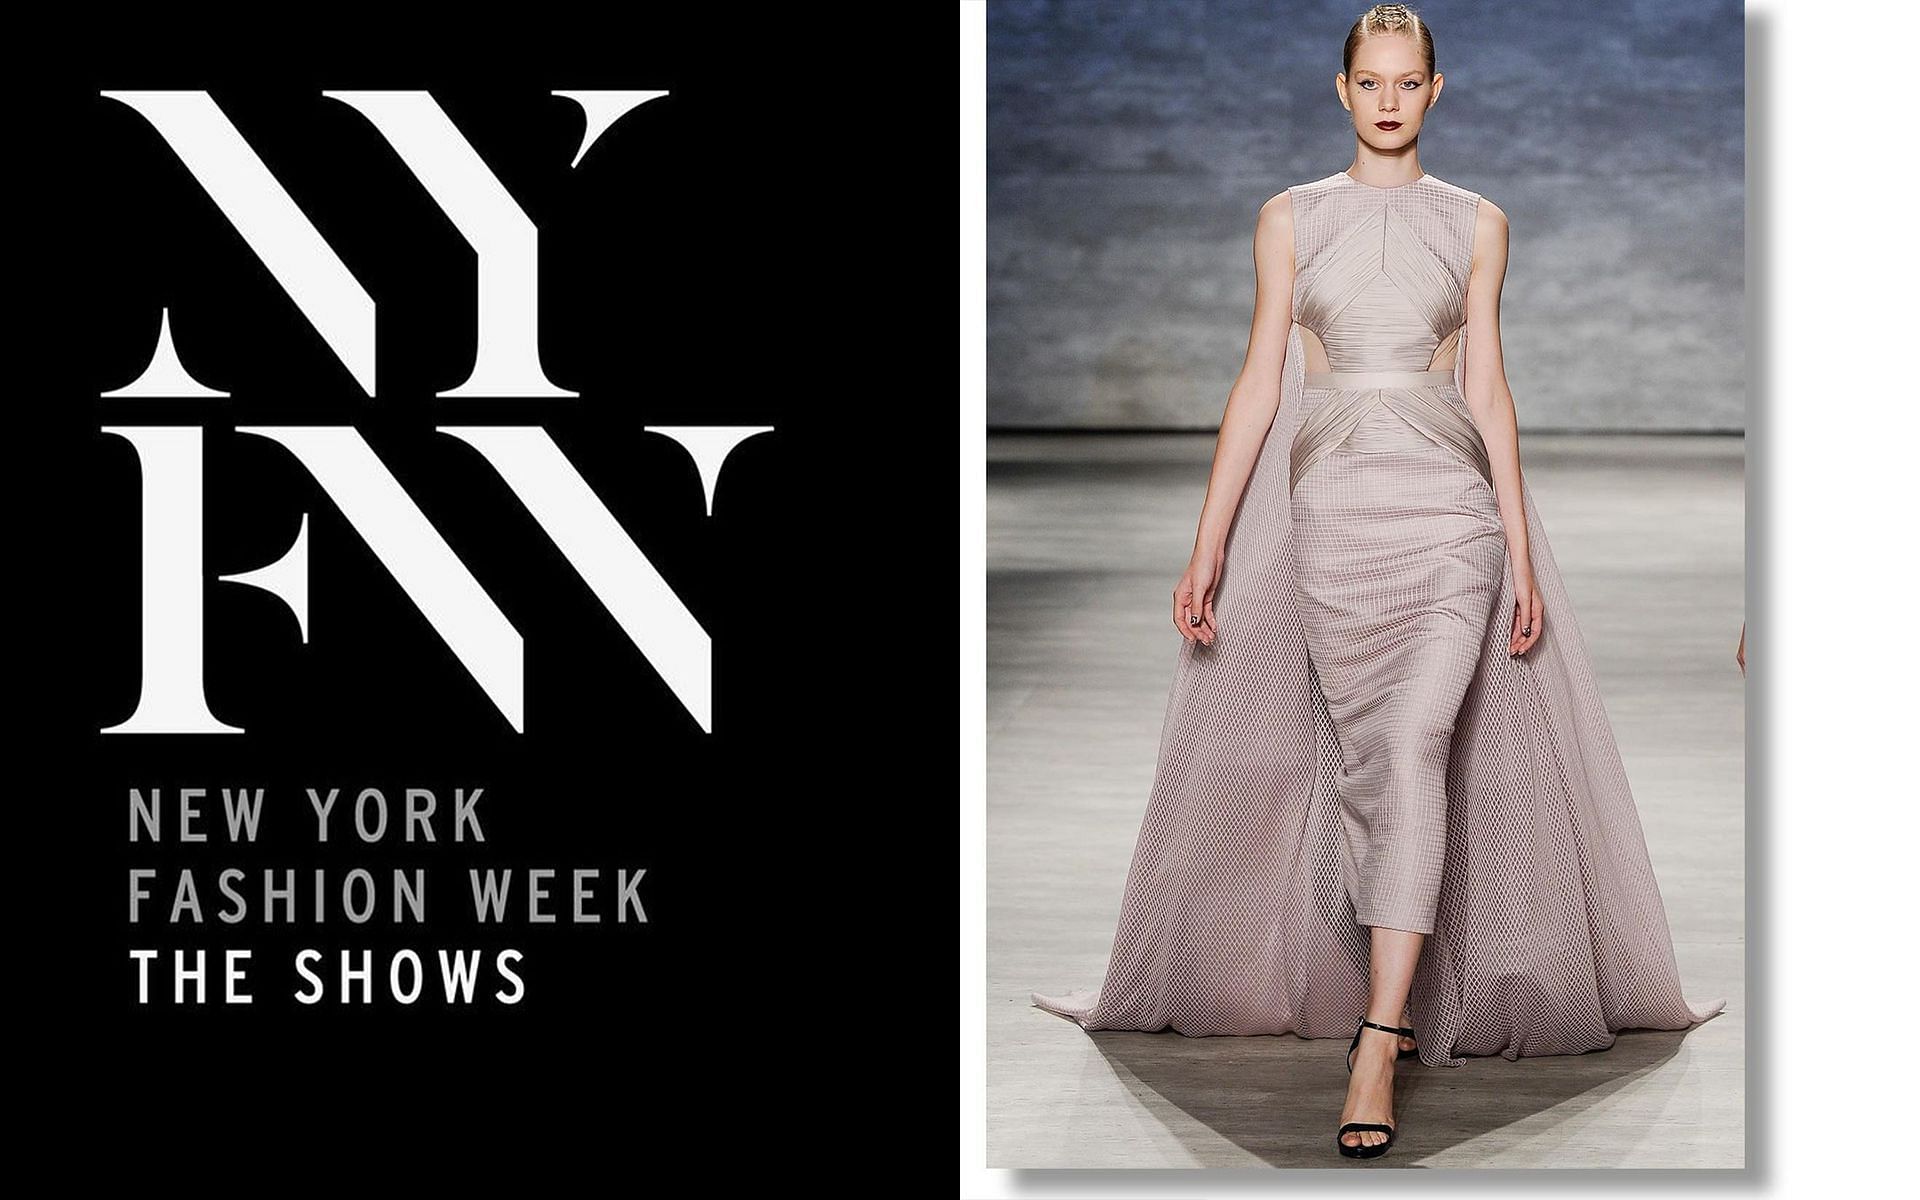 New York Fashion Week 2022 Where to buy tickets, dates, shows, and more